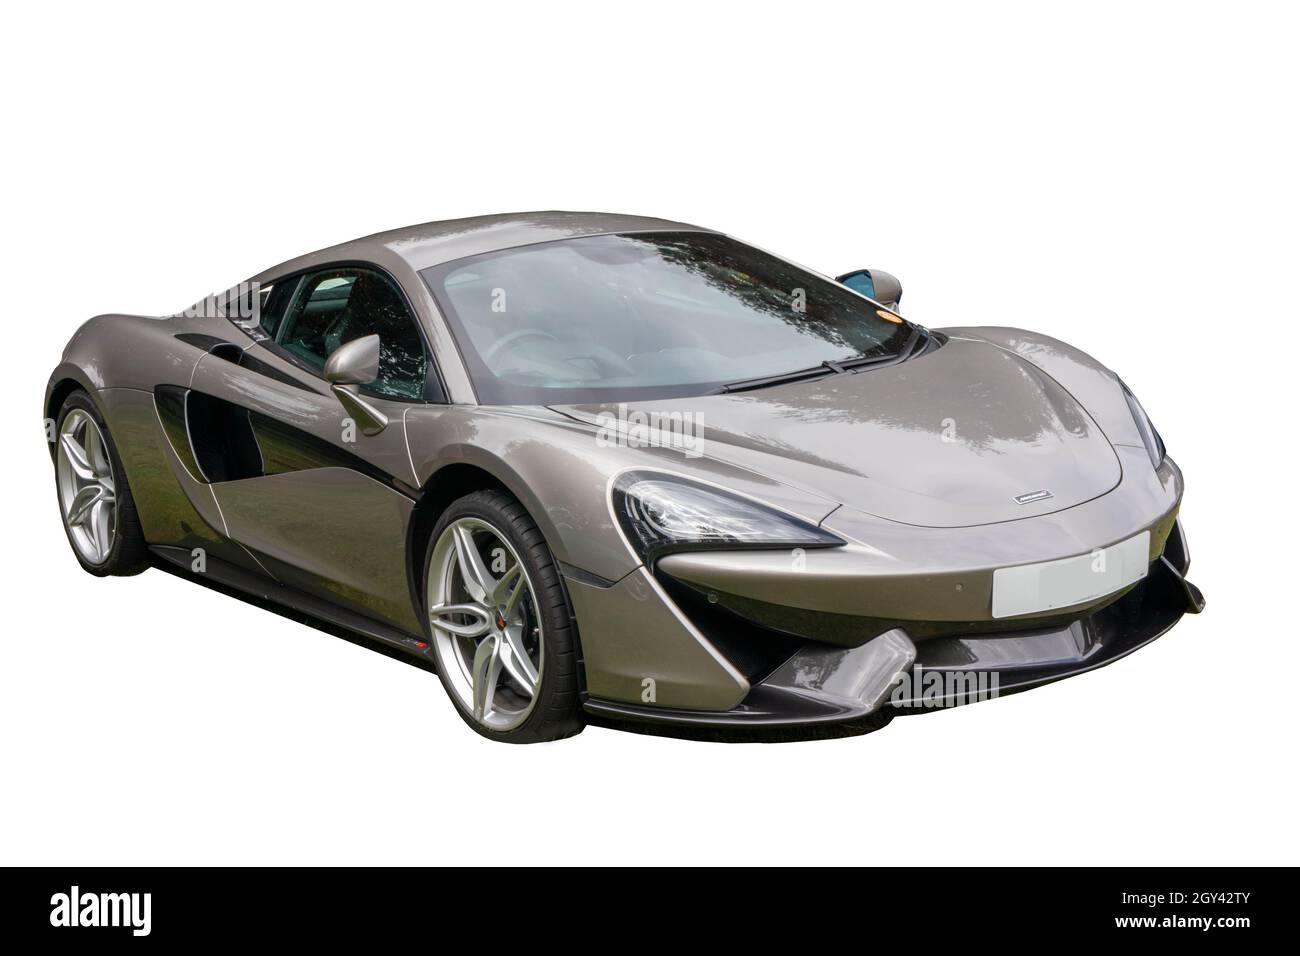 naphill, England - August 29th 2021: Maclaren 570S sports car. It has a top speed of 204 mph Stock Photo